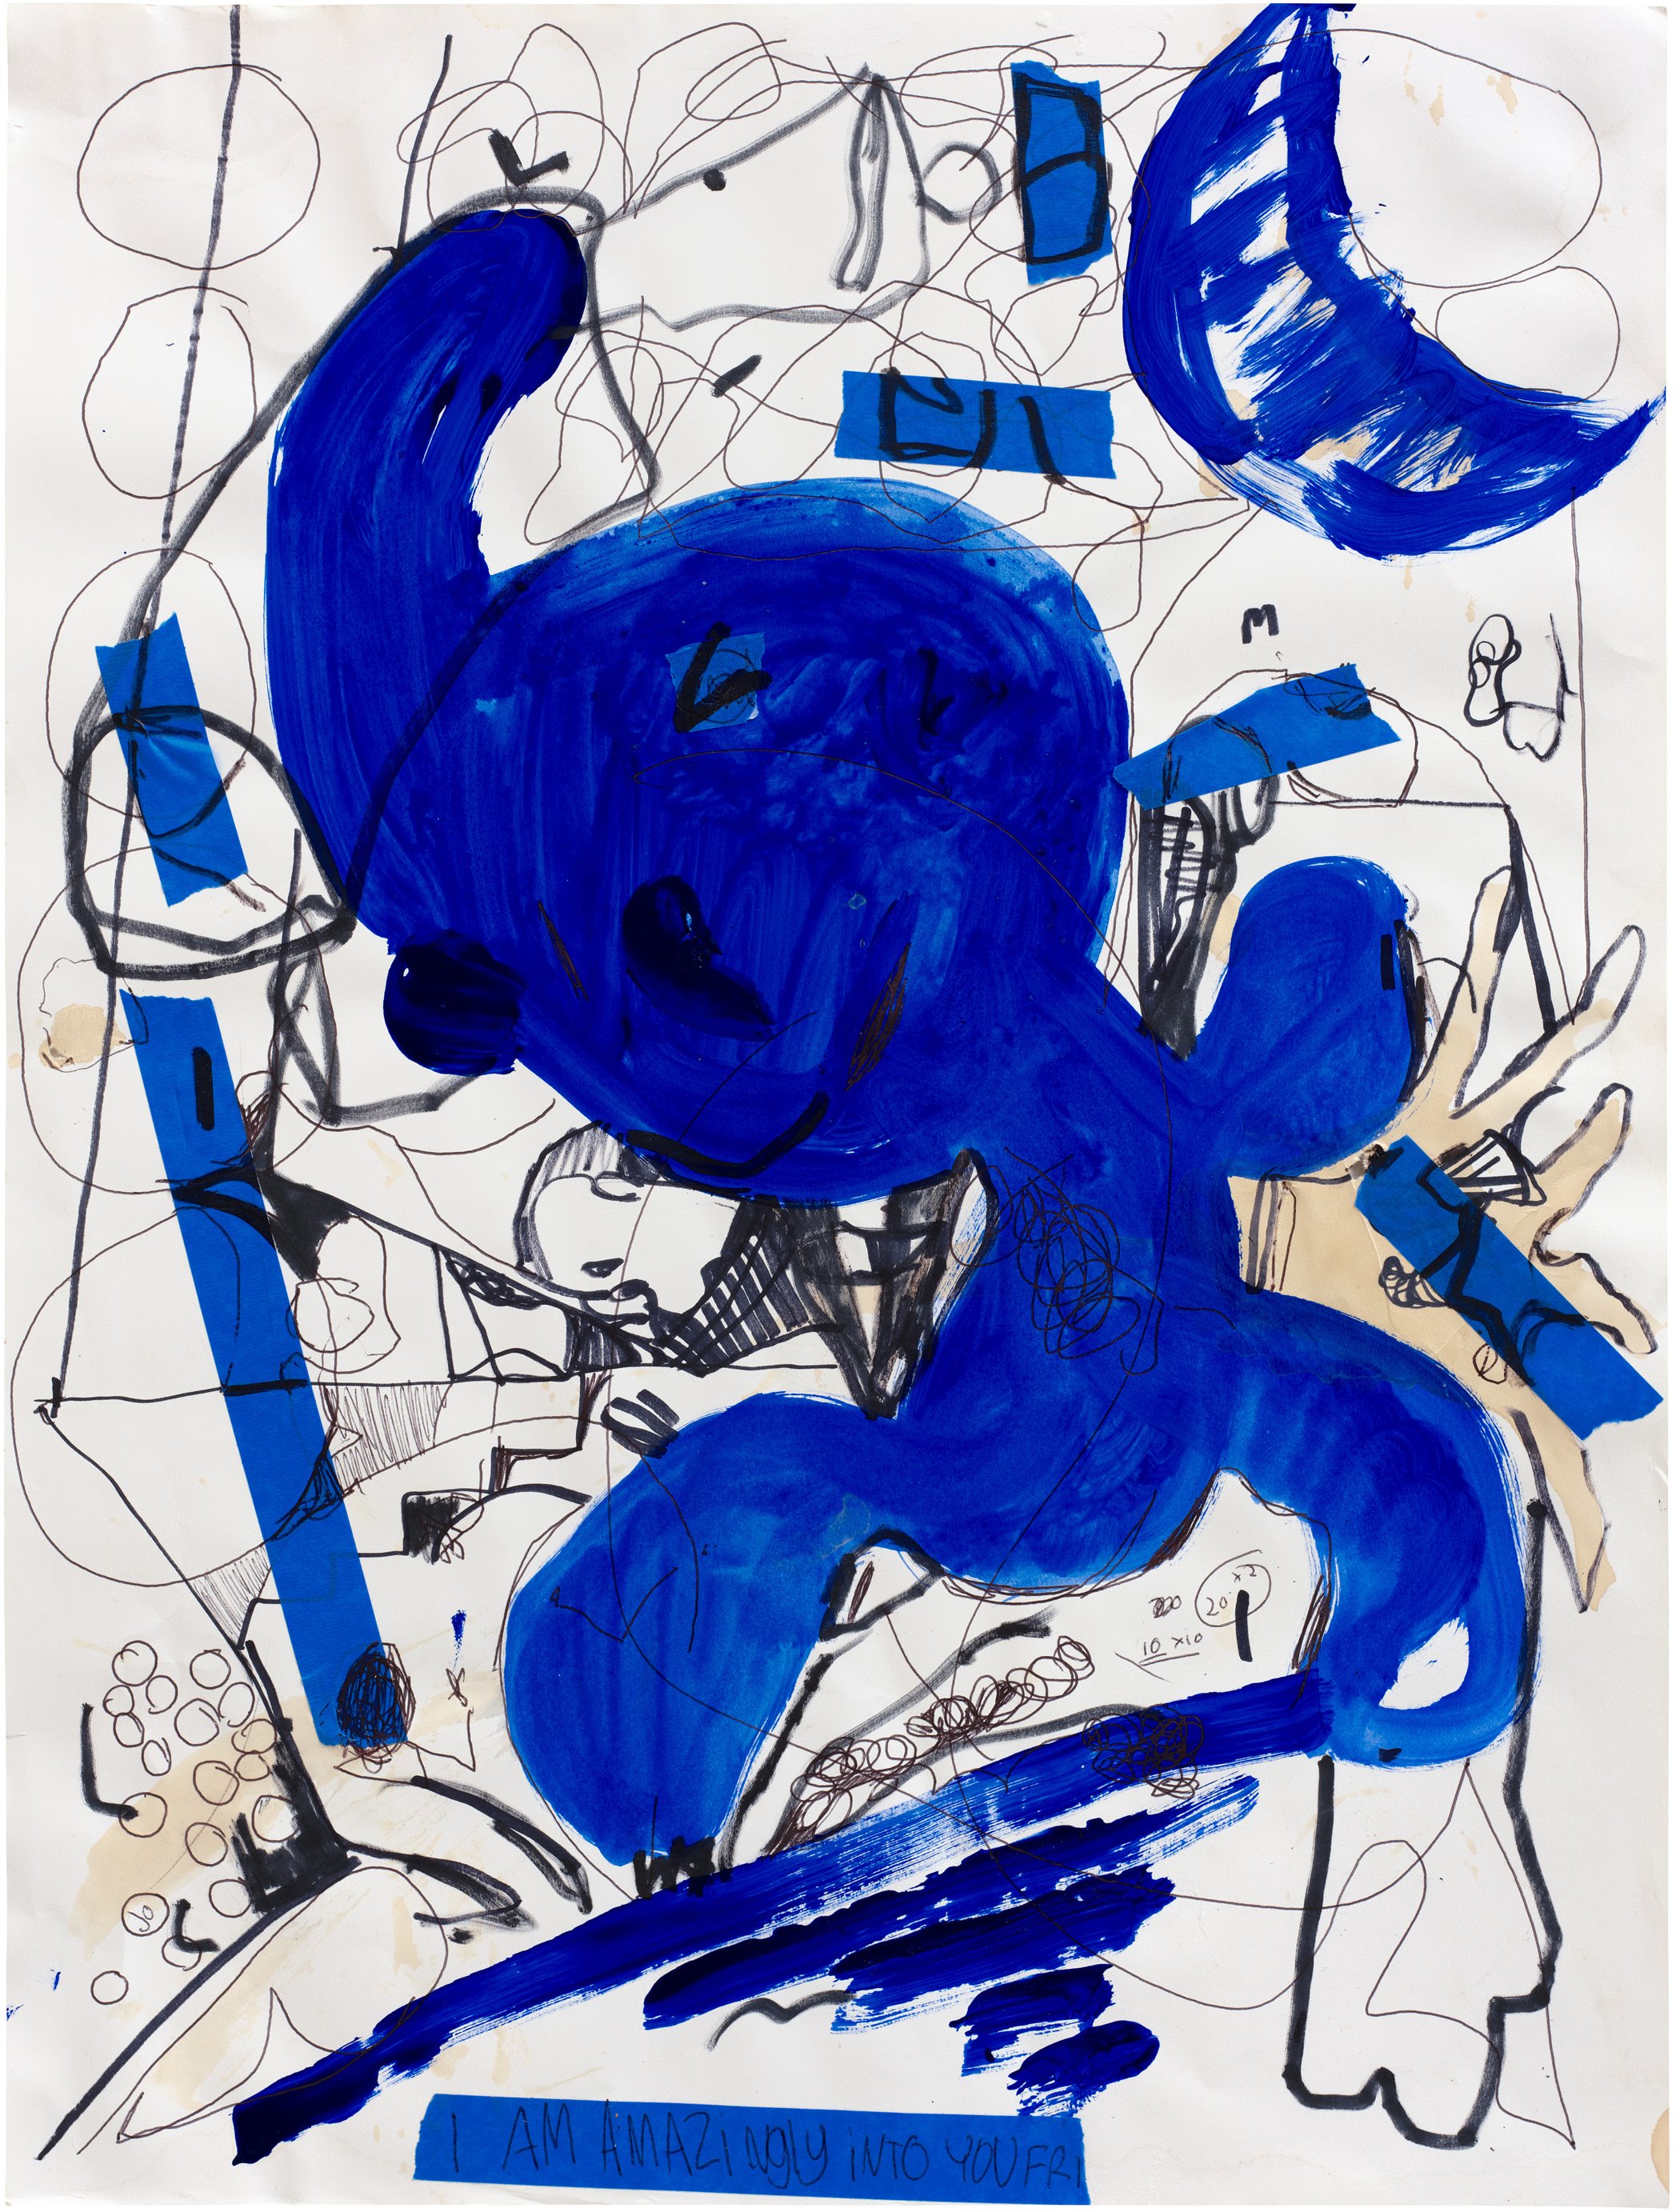  Drew Beattie and Ben Shepard DBBS-DRW-2021-205 2021 acrylic, marker, ballpoint and tape on paper 24 x 18 inches 